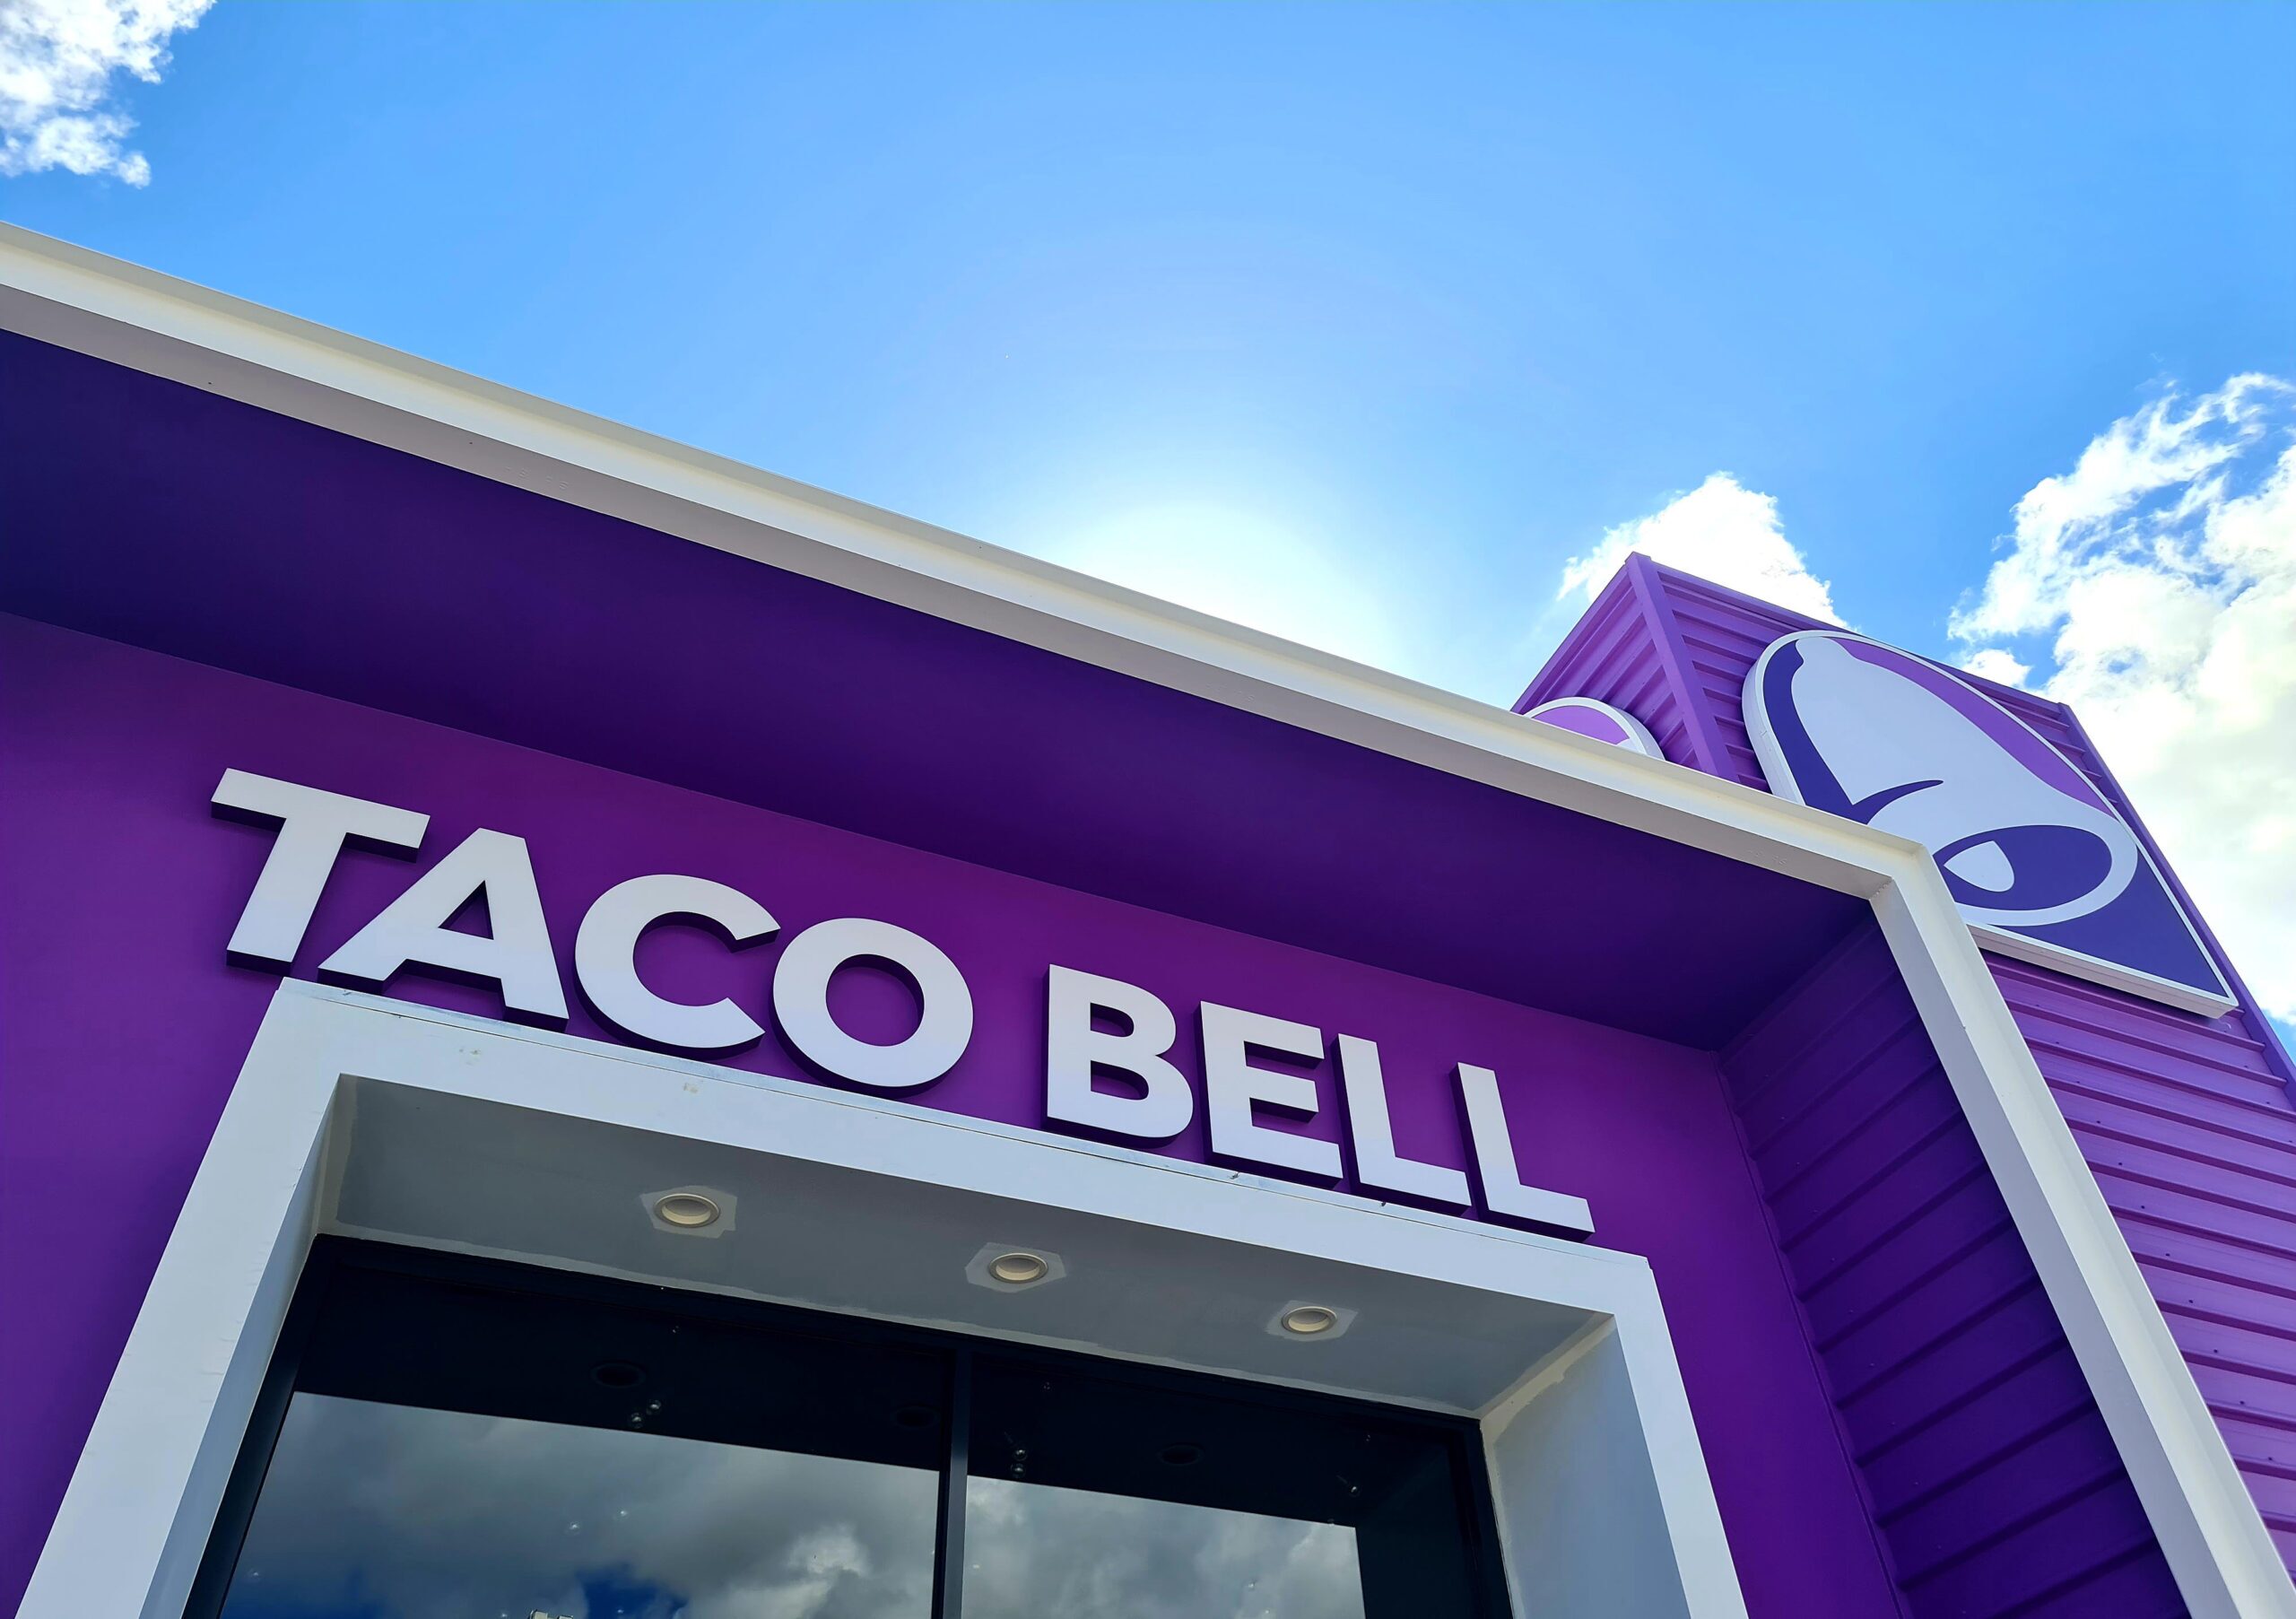 Image: A Taco Bell restaurant in Dubai, showcasing its vibrant atmosphere and menu offerings.